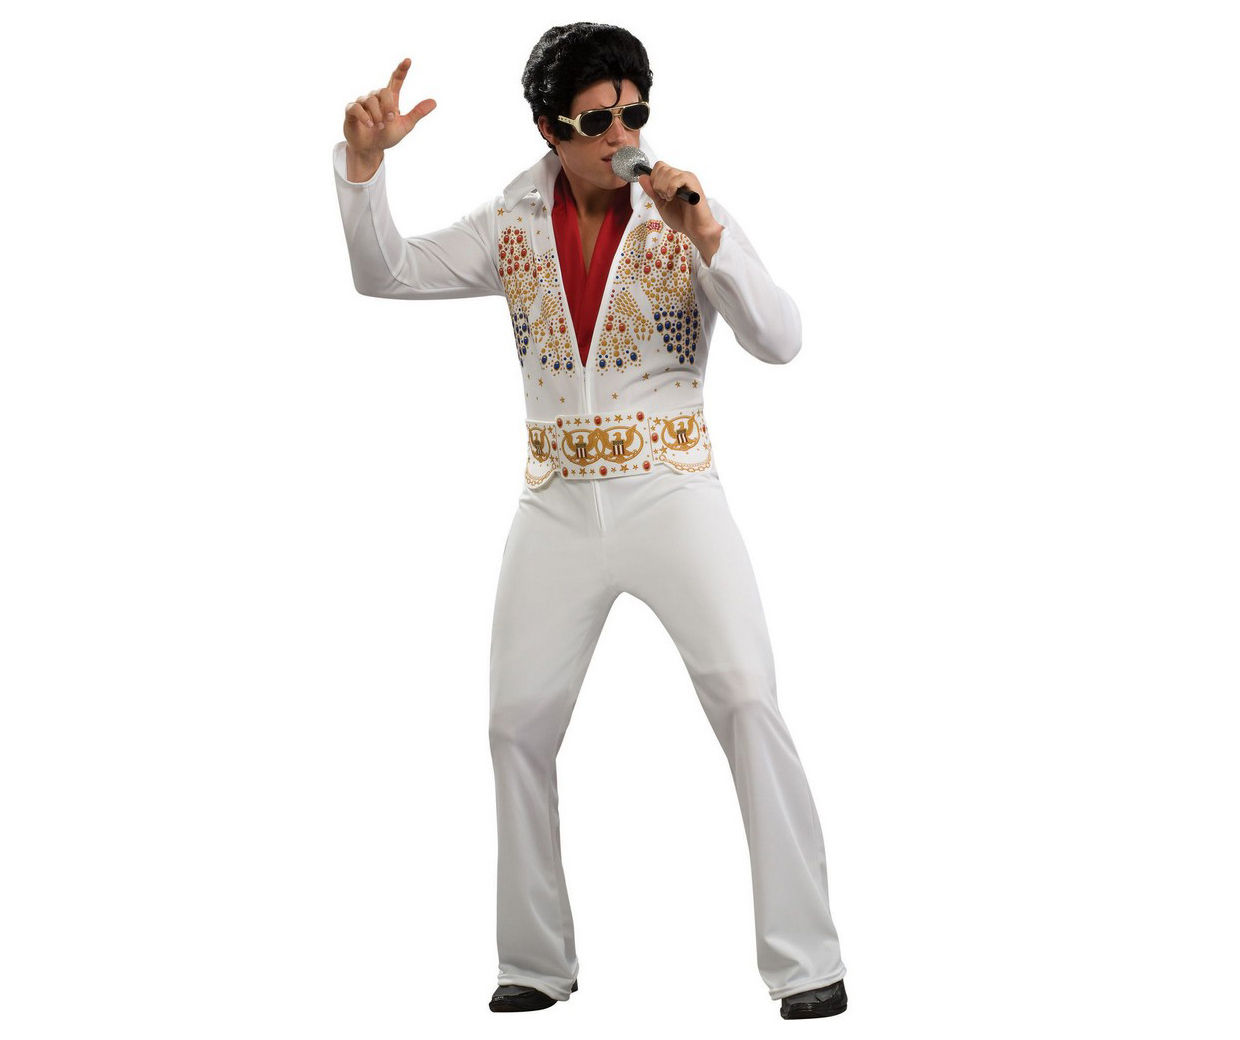 Adult Size L Deluxe Elvis Costume